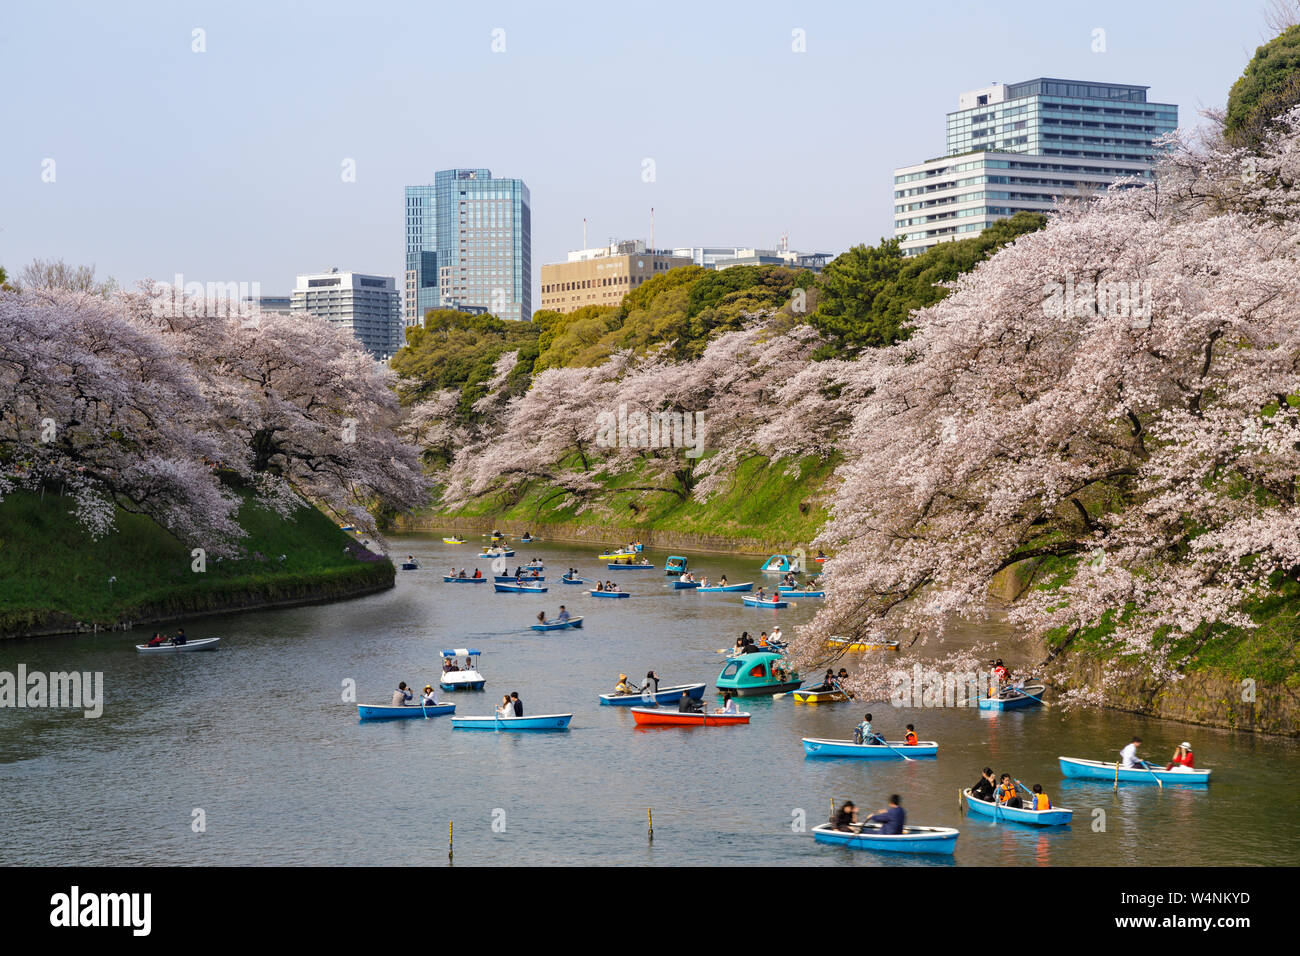 People enjoy the cherry blossoms surrounding the Imperial Palace moat in Tokyo, Japan. Stock Photo